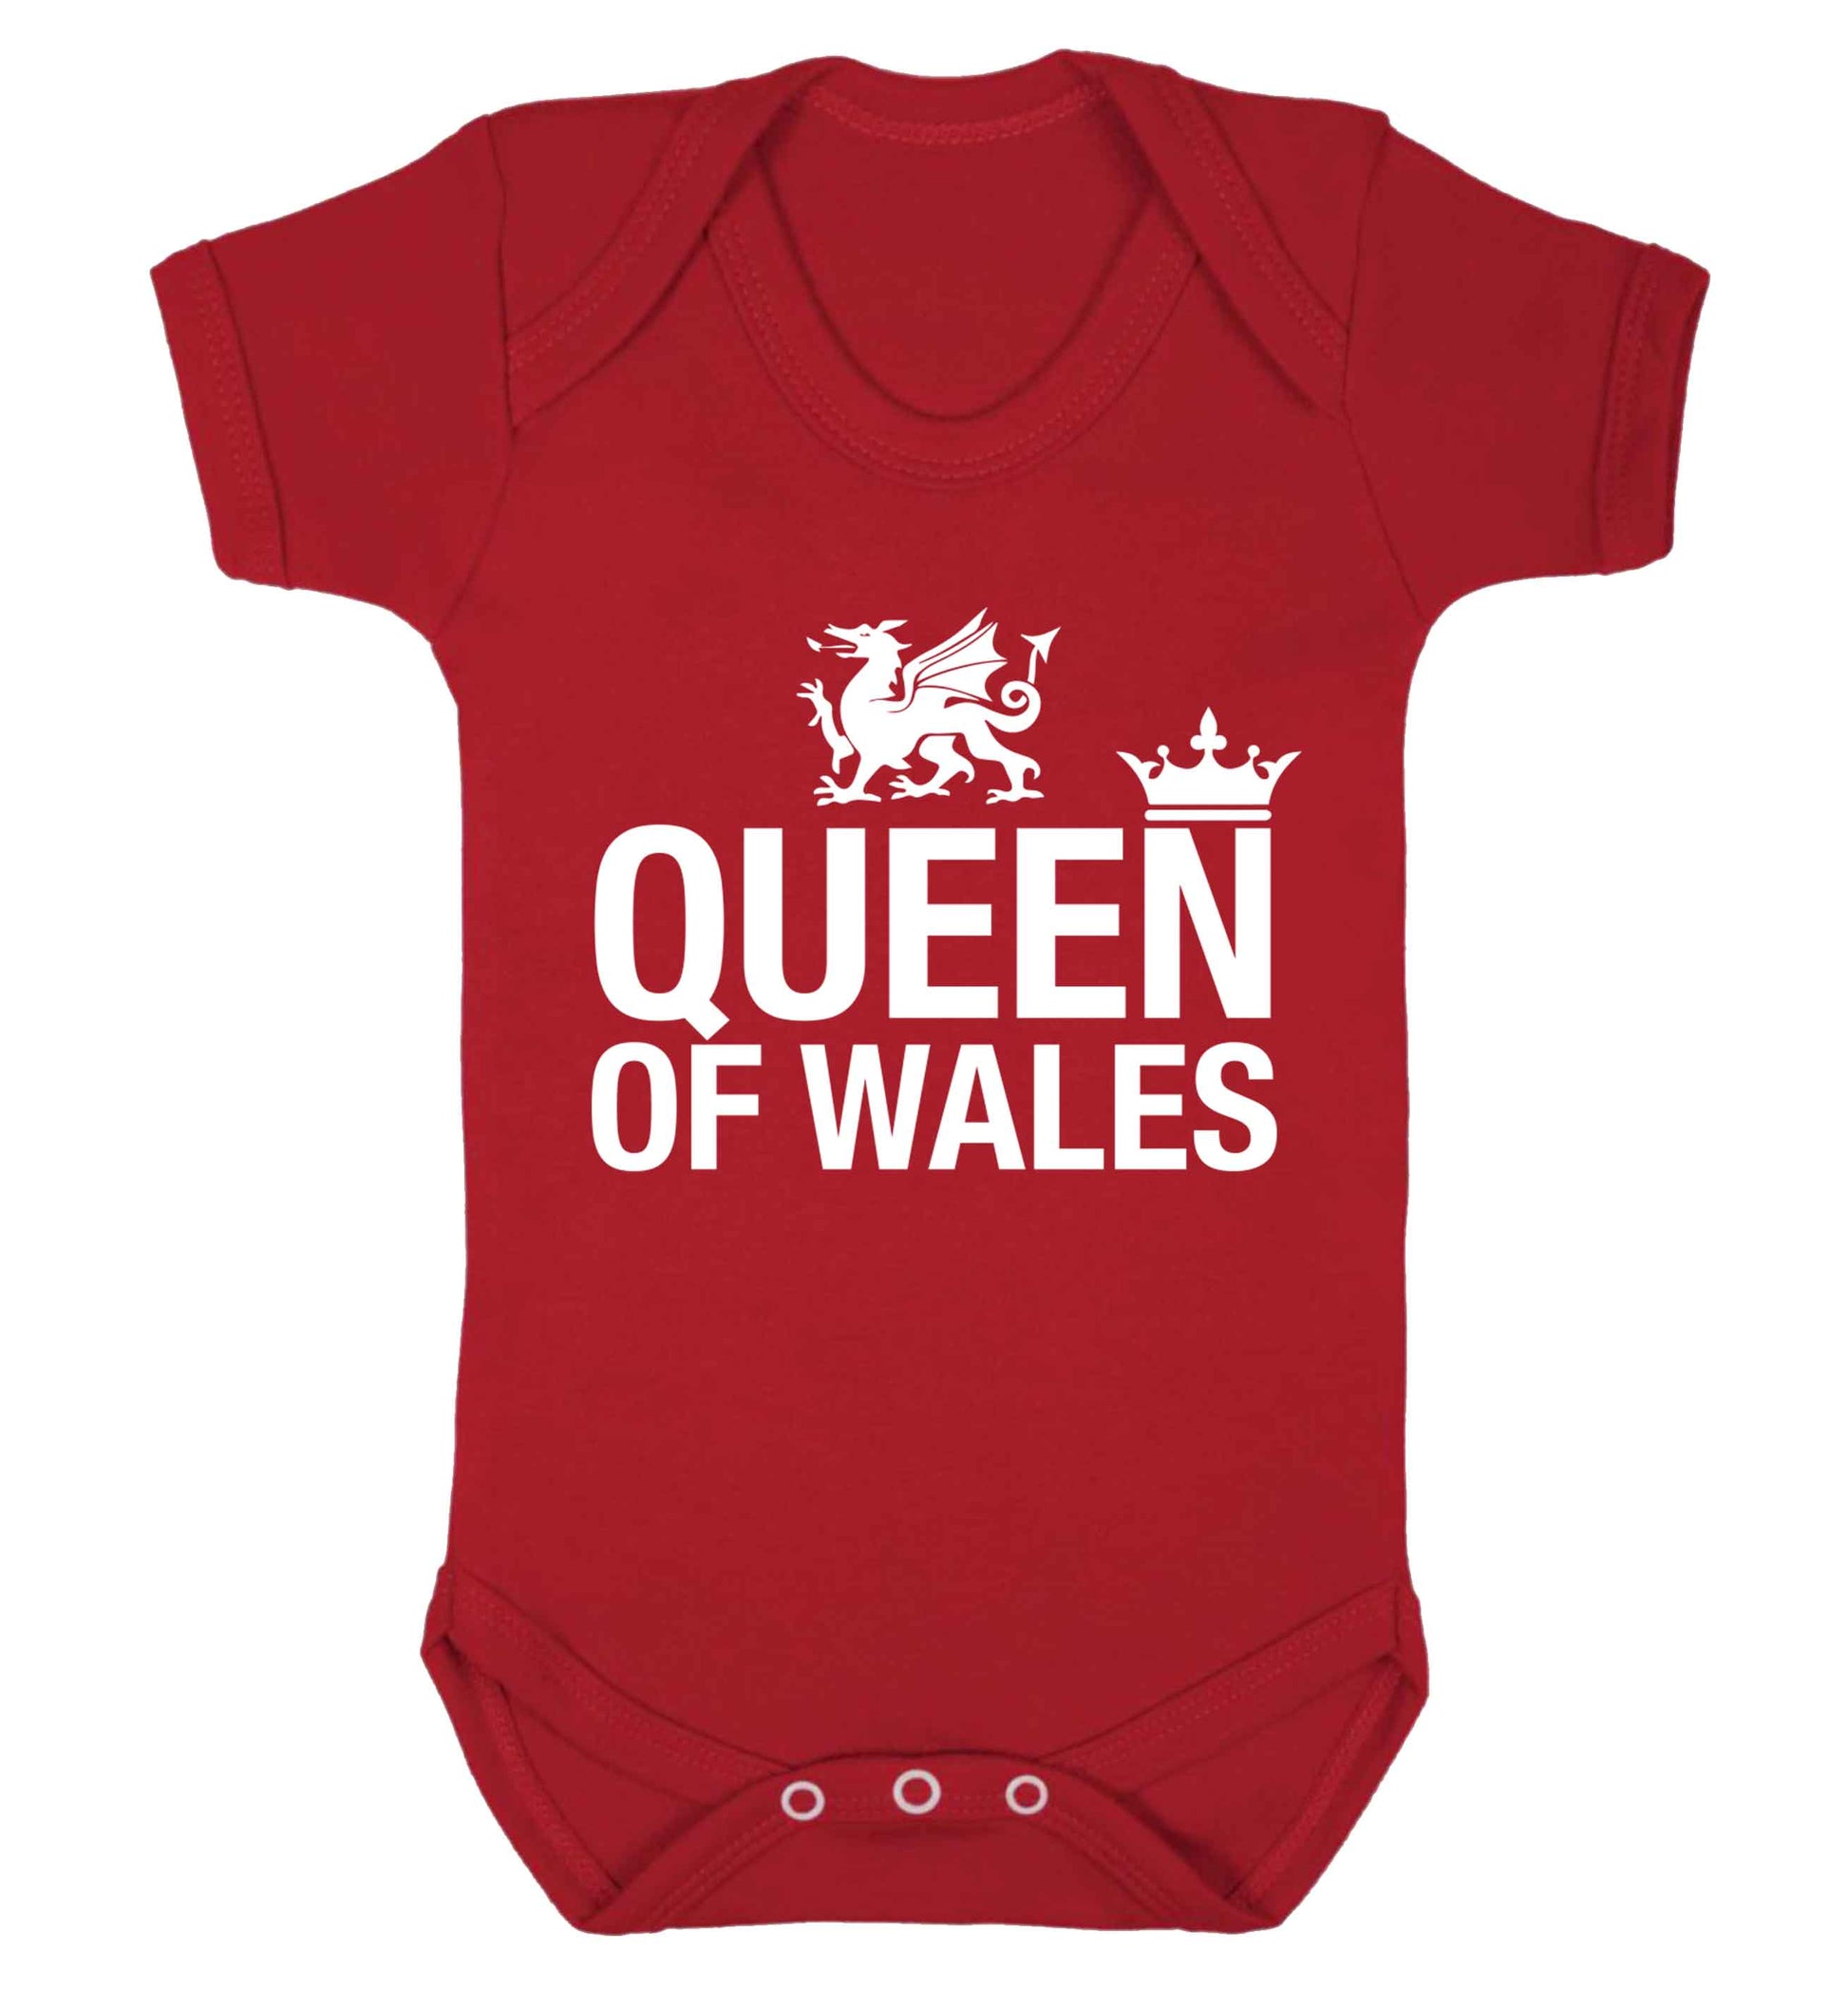 Queen of Wales Baby Vest red 18-24 months